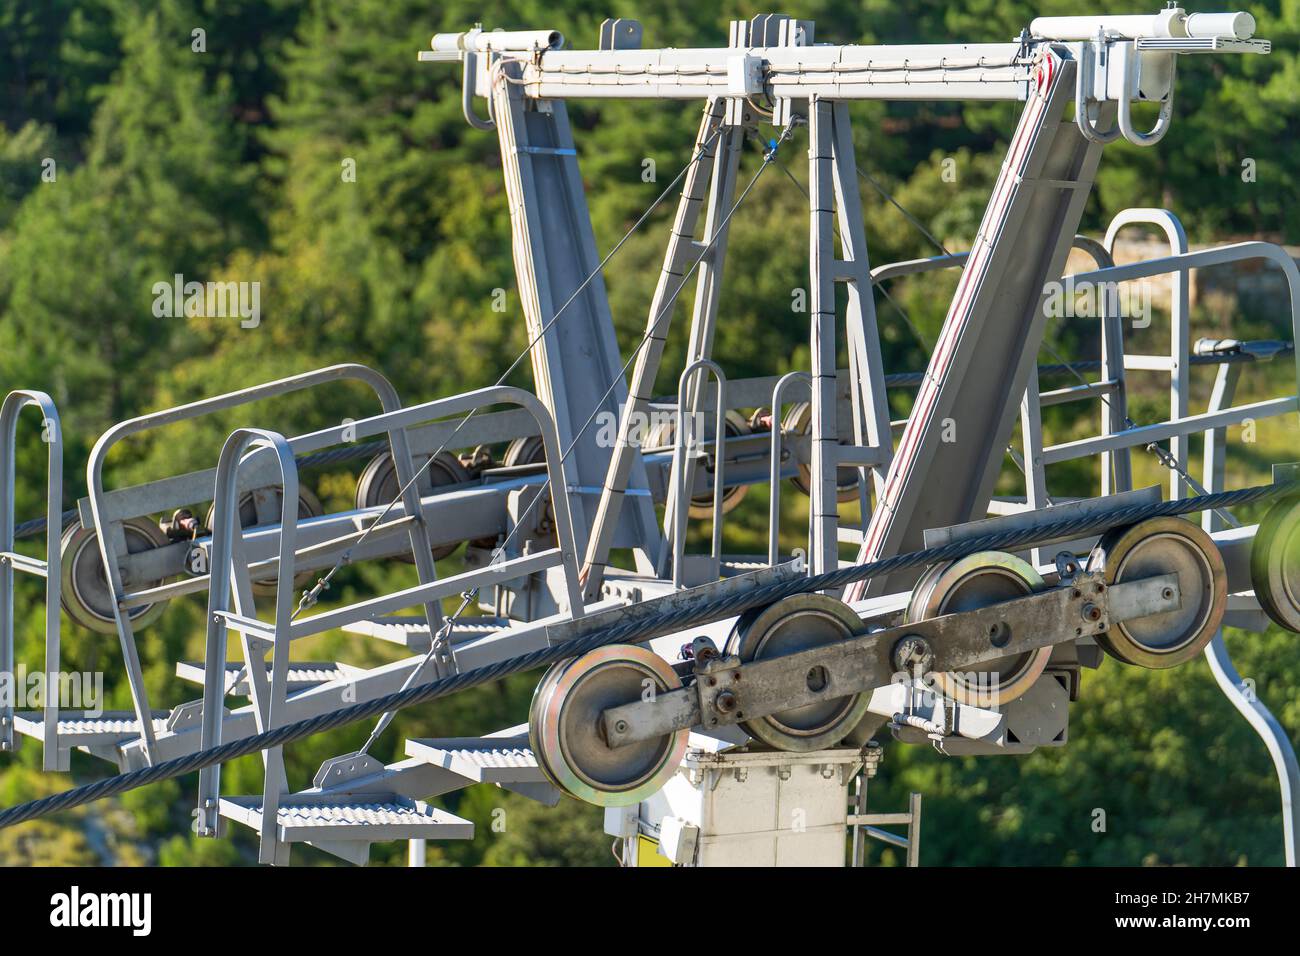 Roller ski lift cable system. Ropeway or cableway or Cable car in mountains. Stock Photo